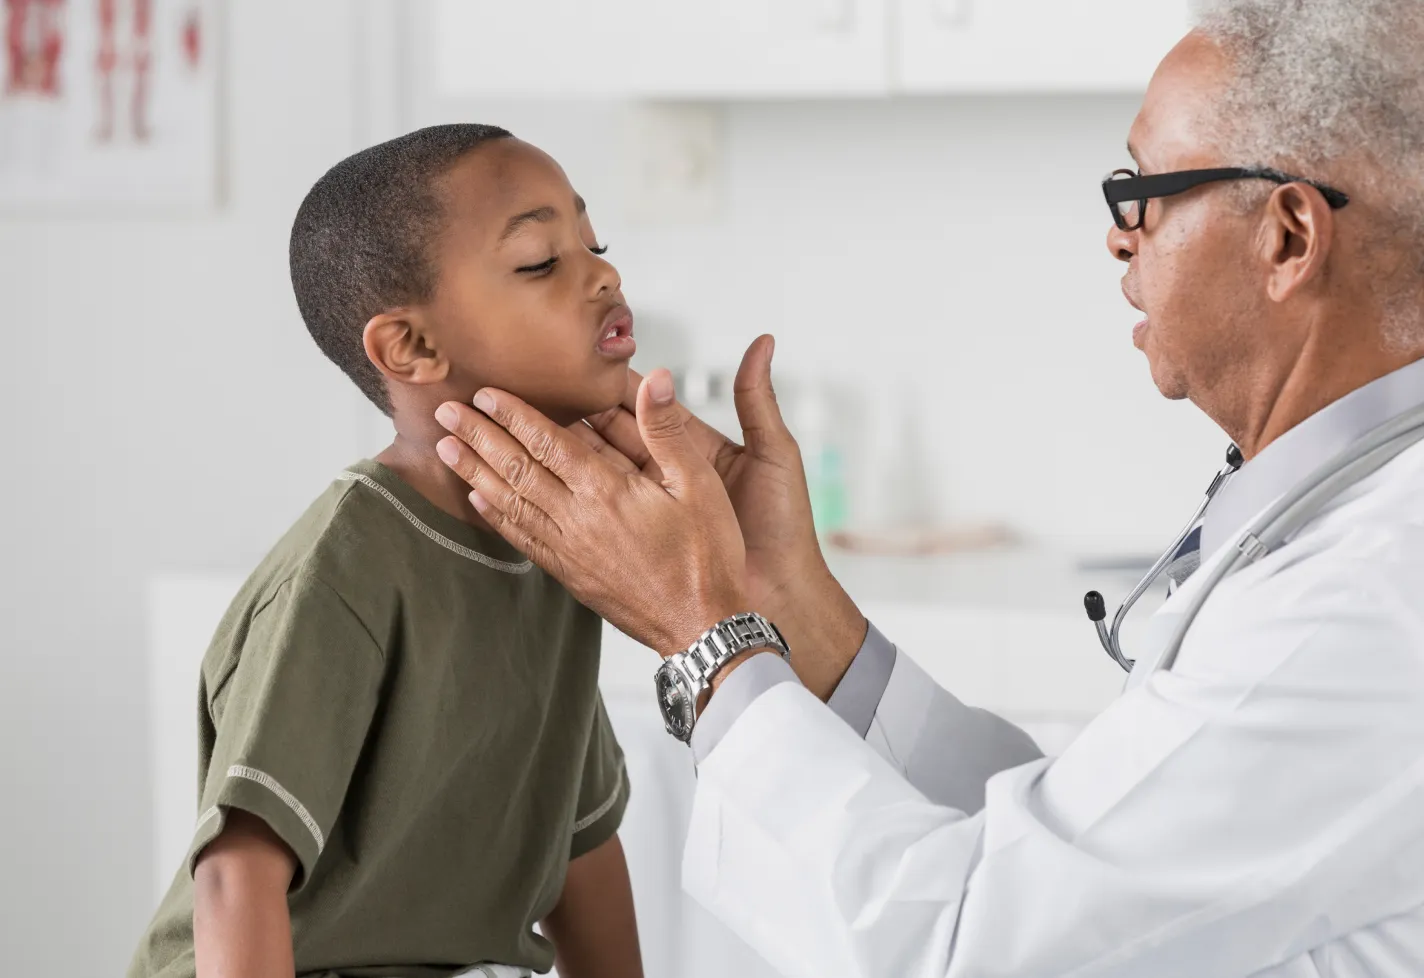 A doctor is examining the neck of a young boy.